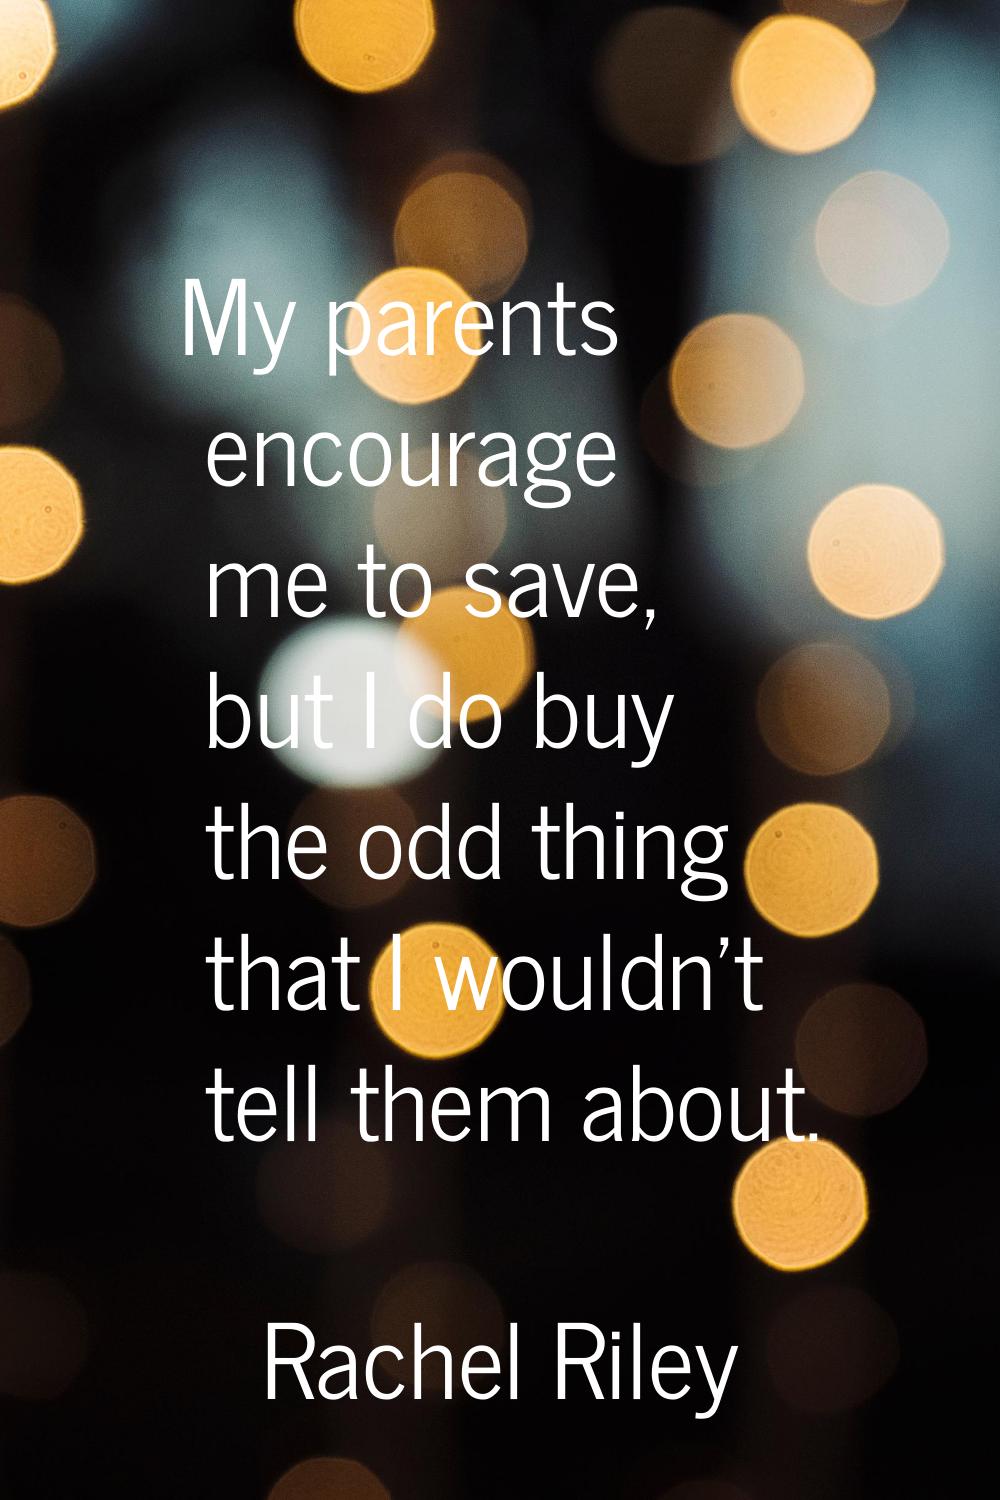 My parents encourage me to save, but I do buy the odd thing that I wouldn't tell them about.